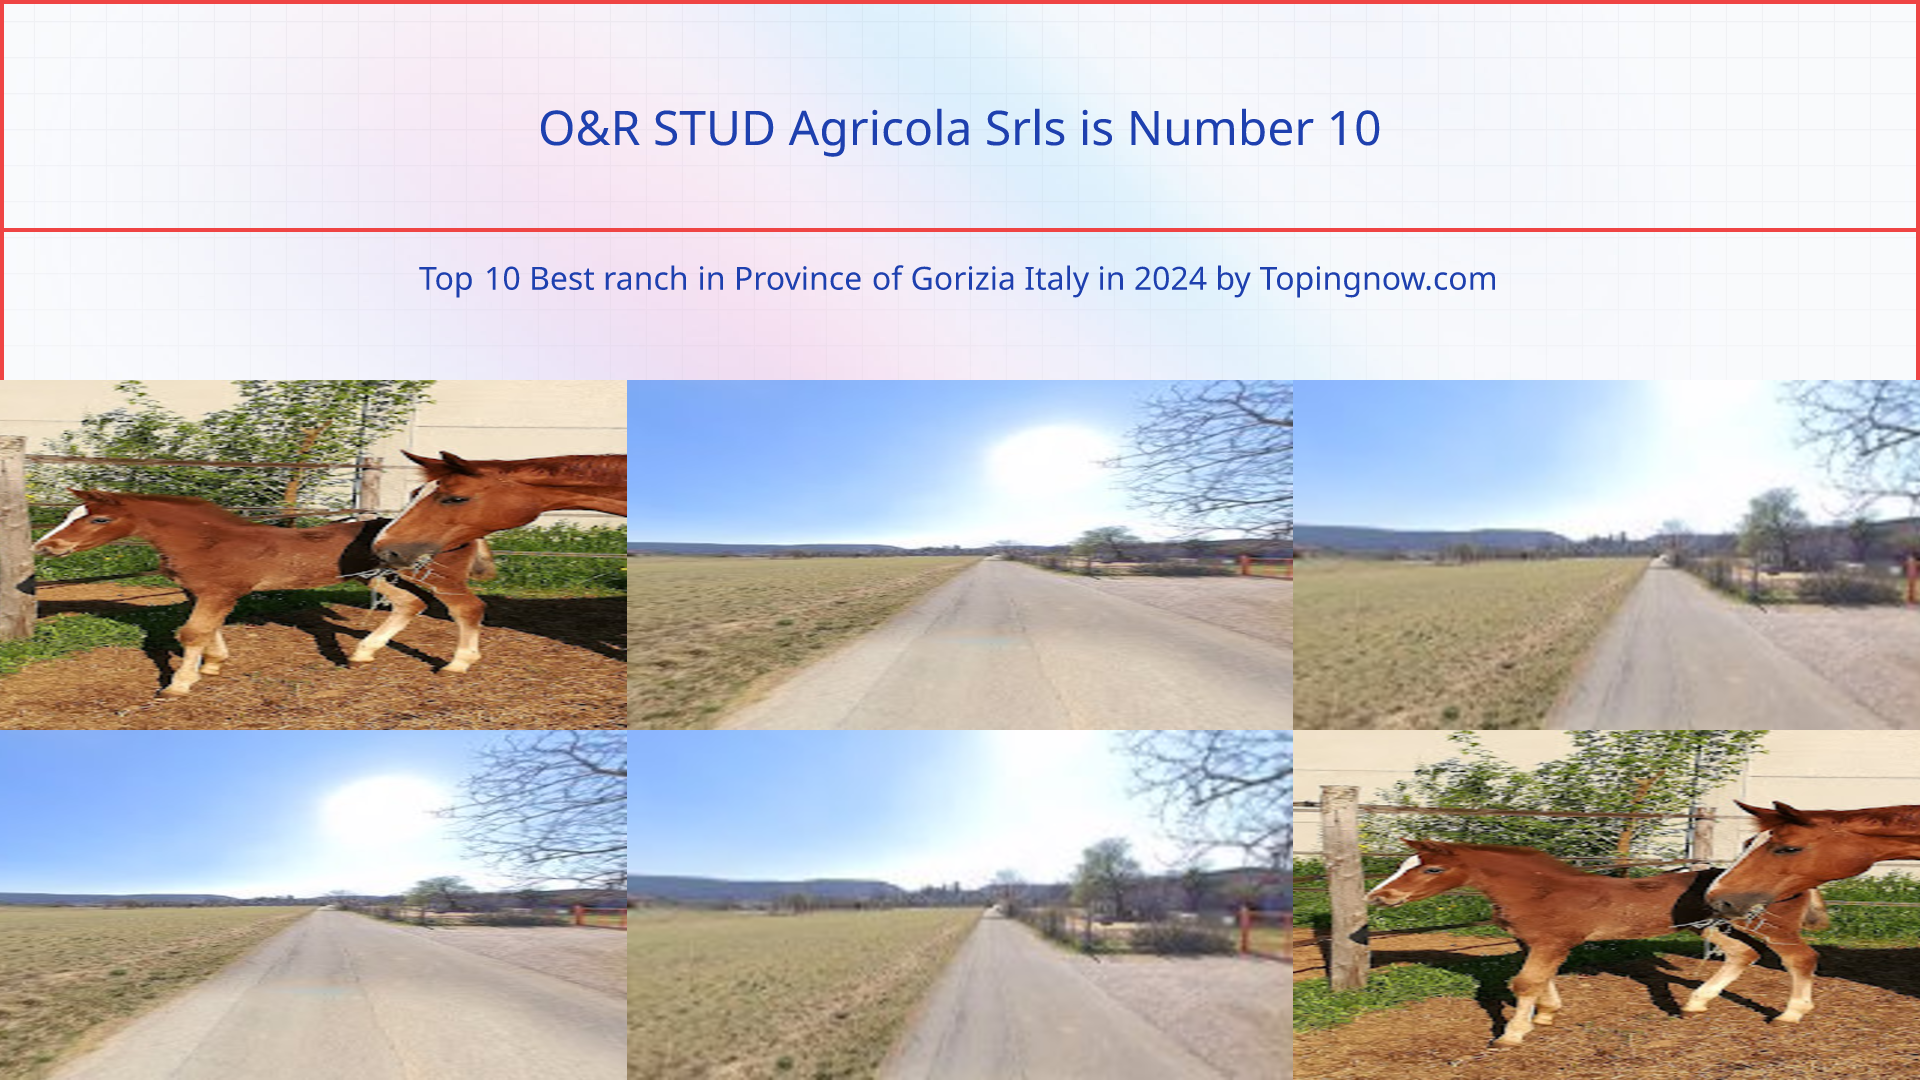 O&R STUD Agricola Srls: Top 10 Best ranch in Province of Gorizia Italy in 2024